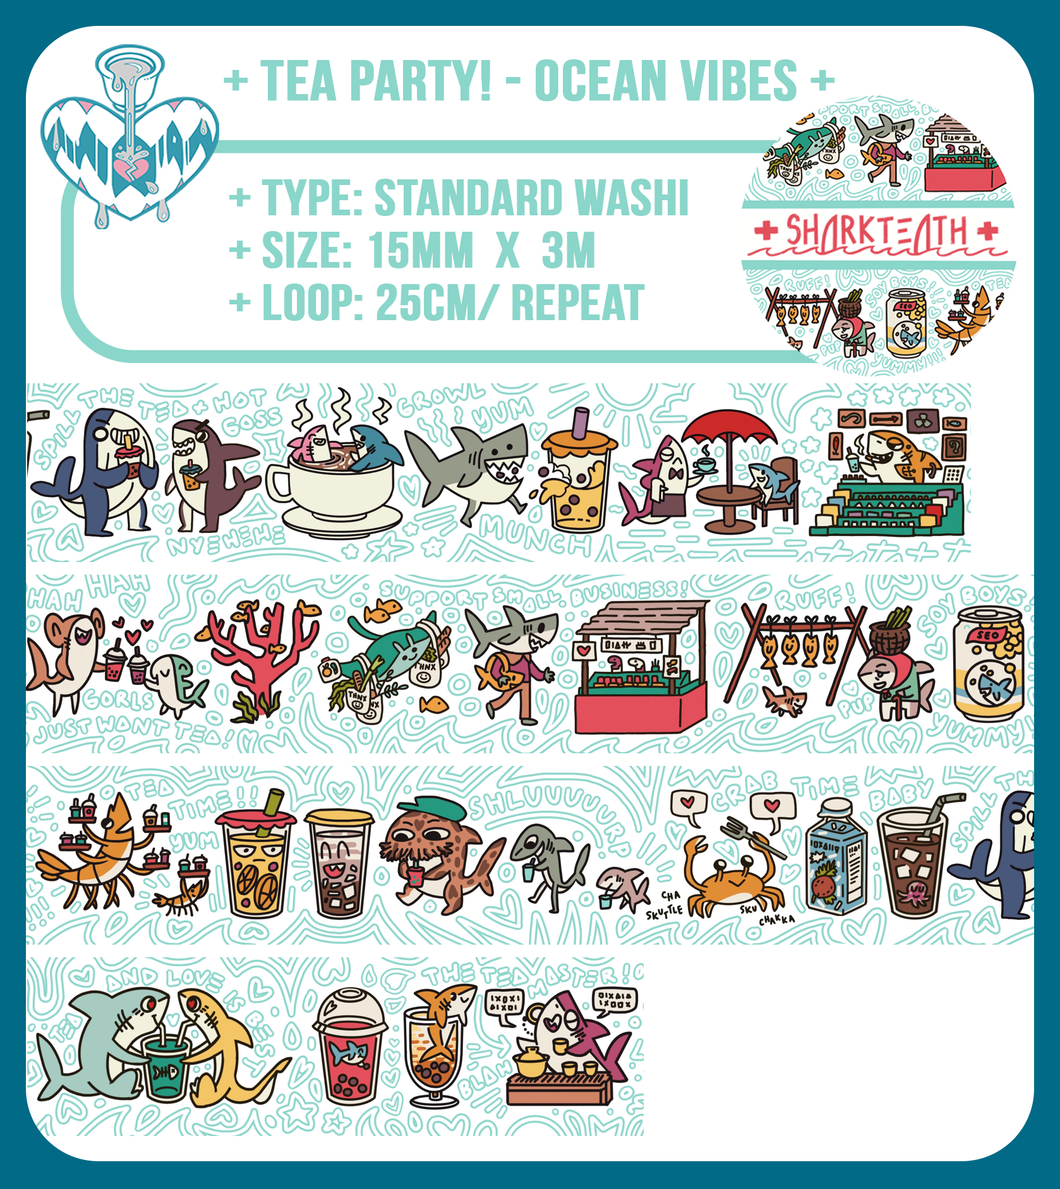 Tea Party! -Ocean Vibes Washi Tape (Limited Print)